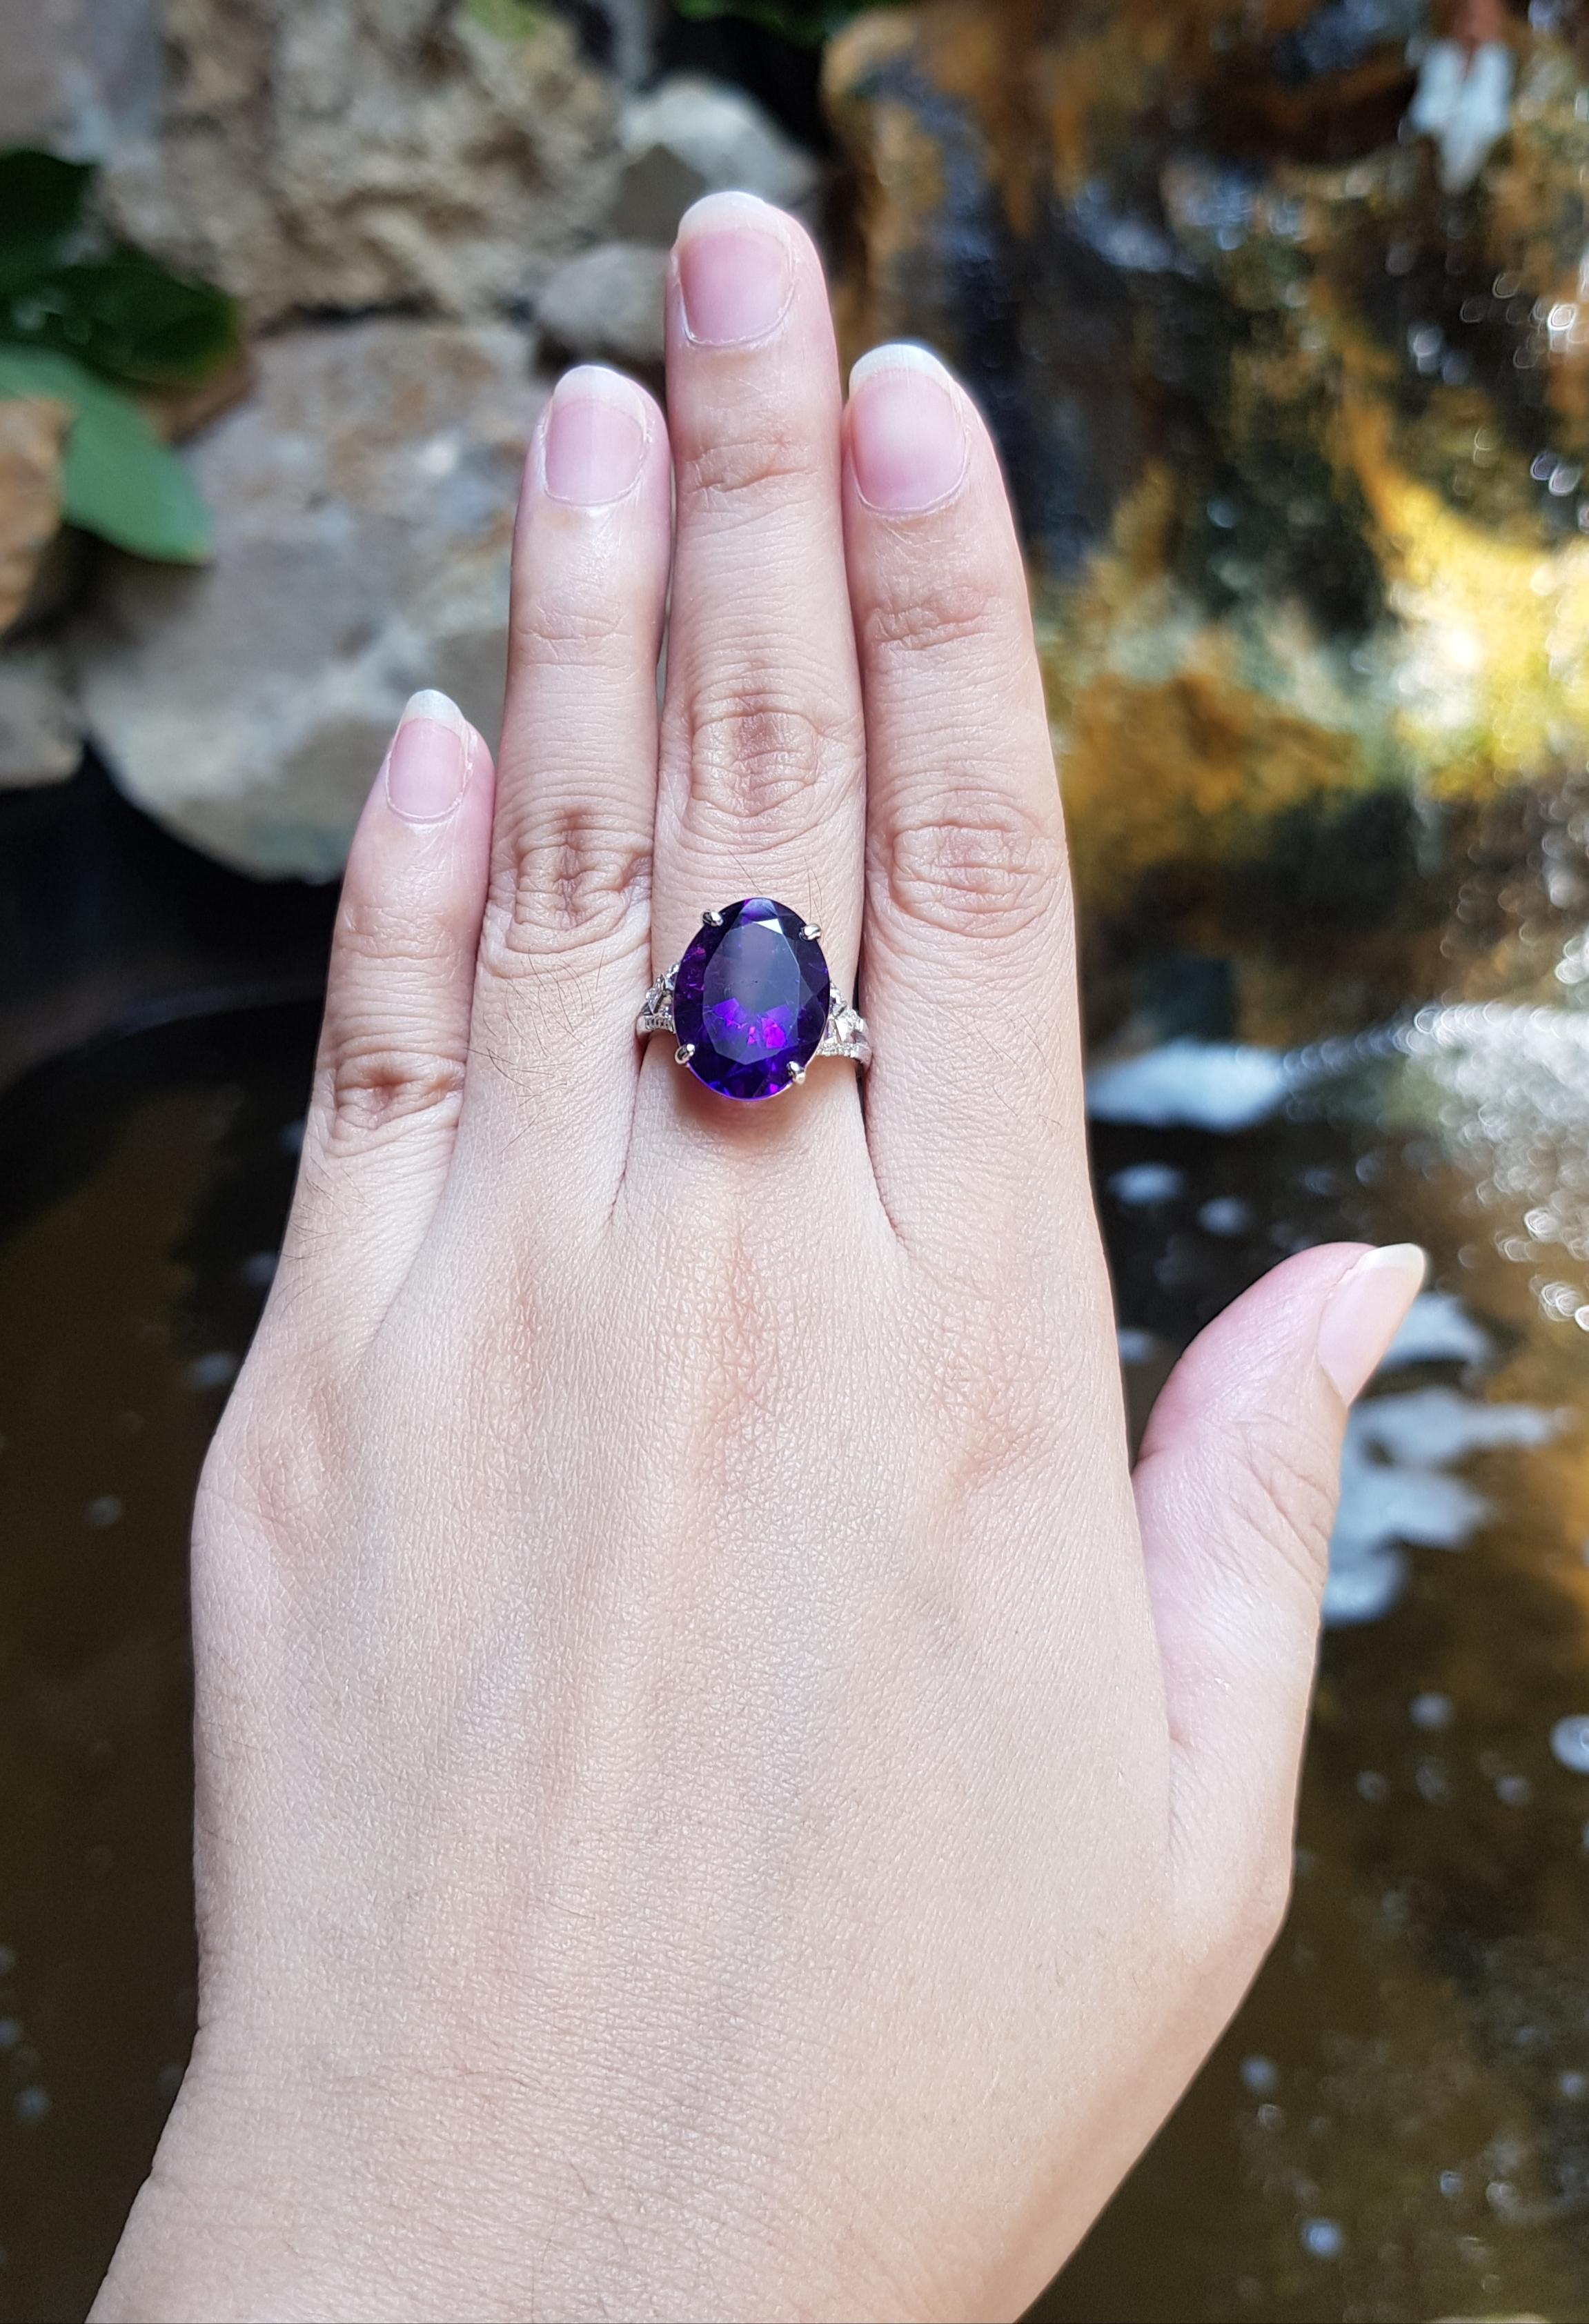 Amethyst 7.26 carats with Diamond 0.10 carat Ring set in 18 Karat White Gold Settings

Width:  1.2 cm 
Length: 1.7 cm
Ring Size: 52
Total Weight: 5.15 grams

